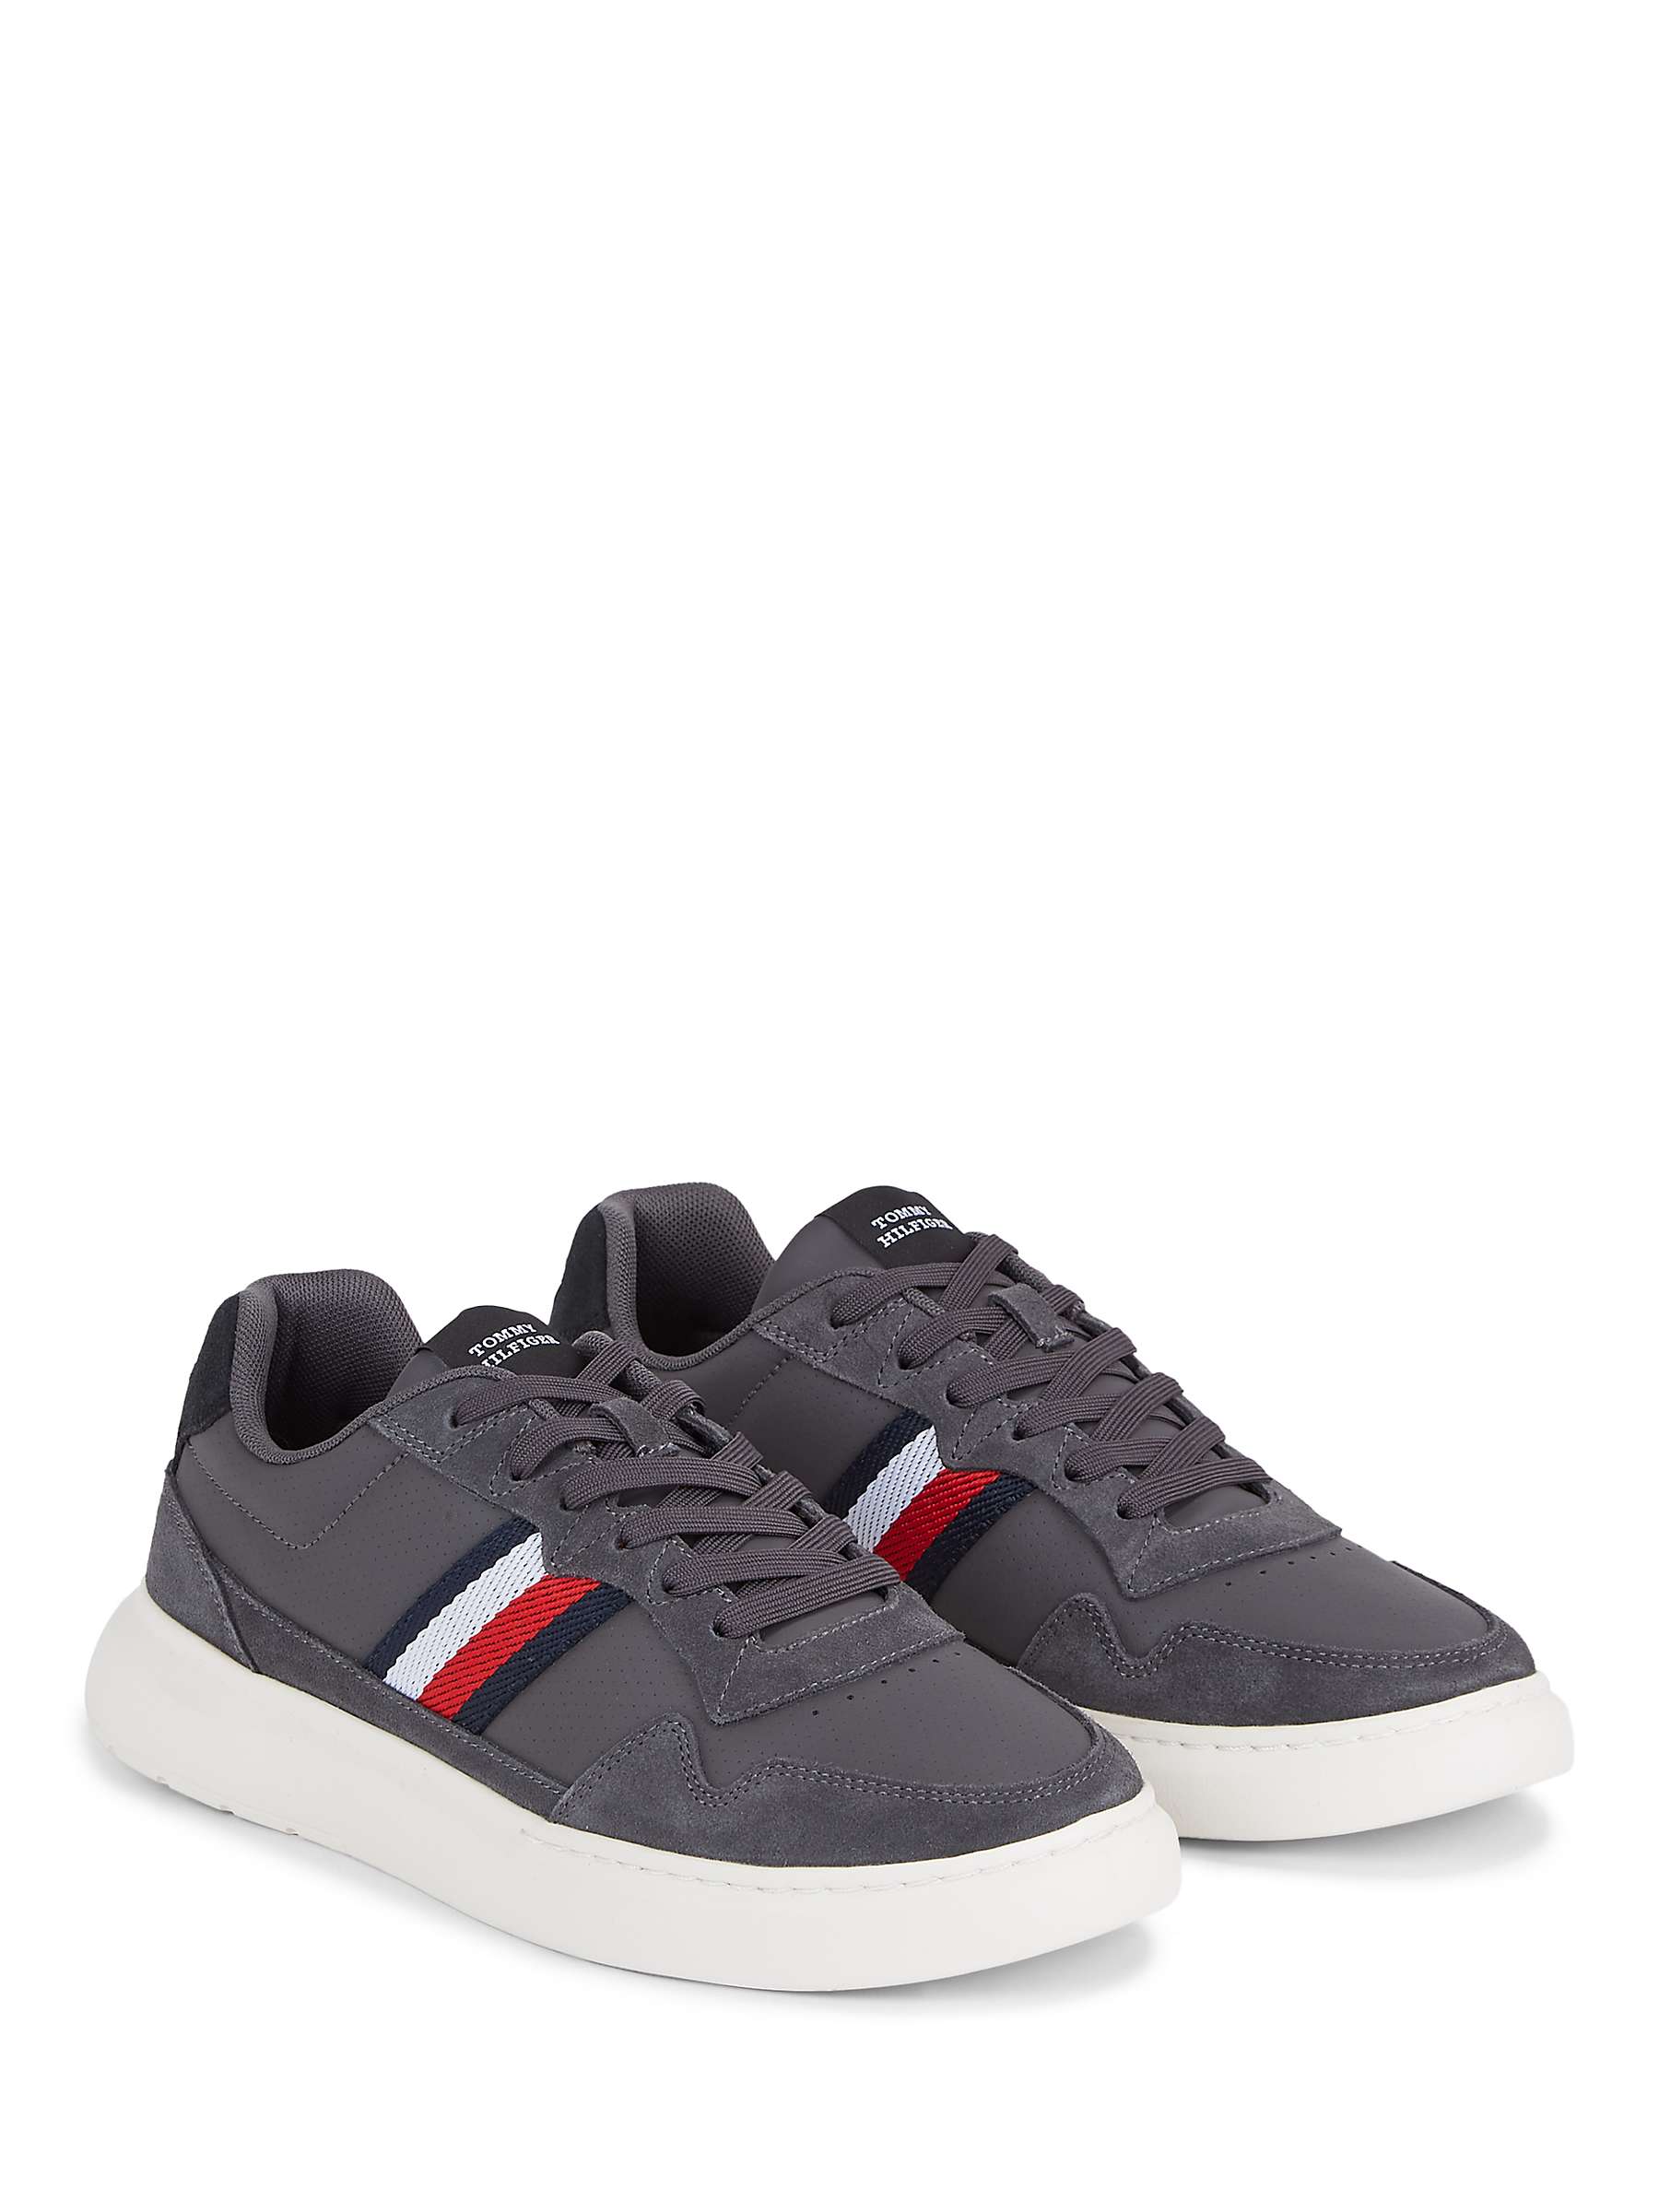 Buy Tommy Hilfiger Leather Trainers, Grey Online at johnlewis.com